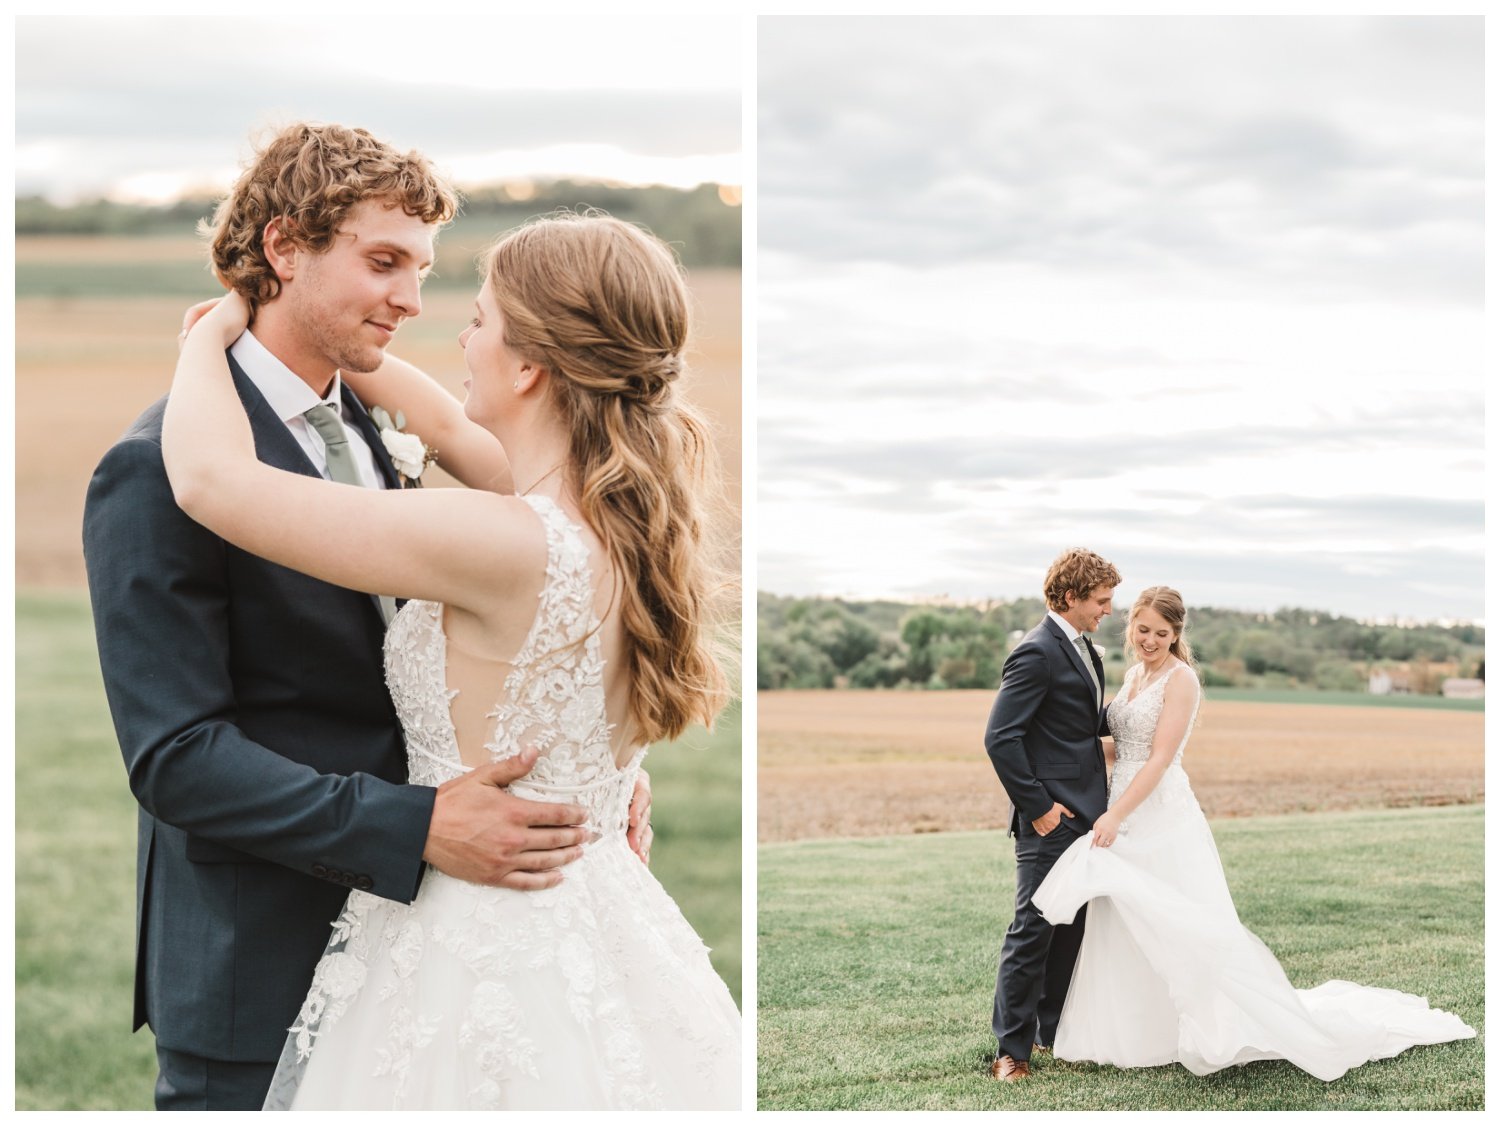 Harvest View Barn at Hershey Farms Wedding, sunset pictures, bride &amp; groom